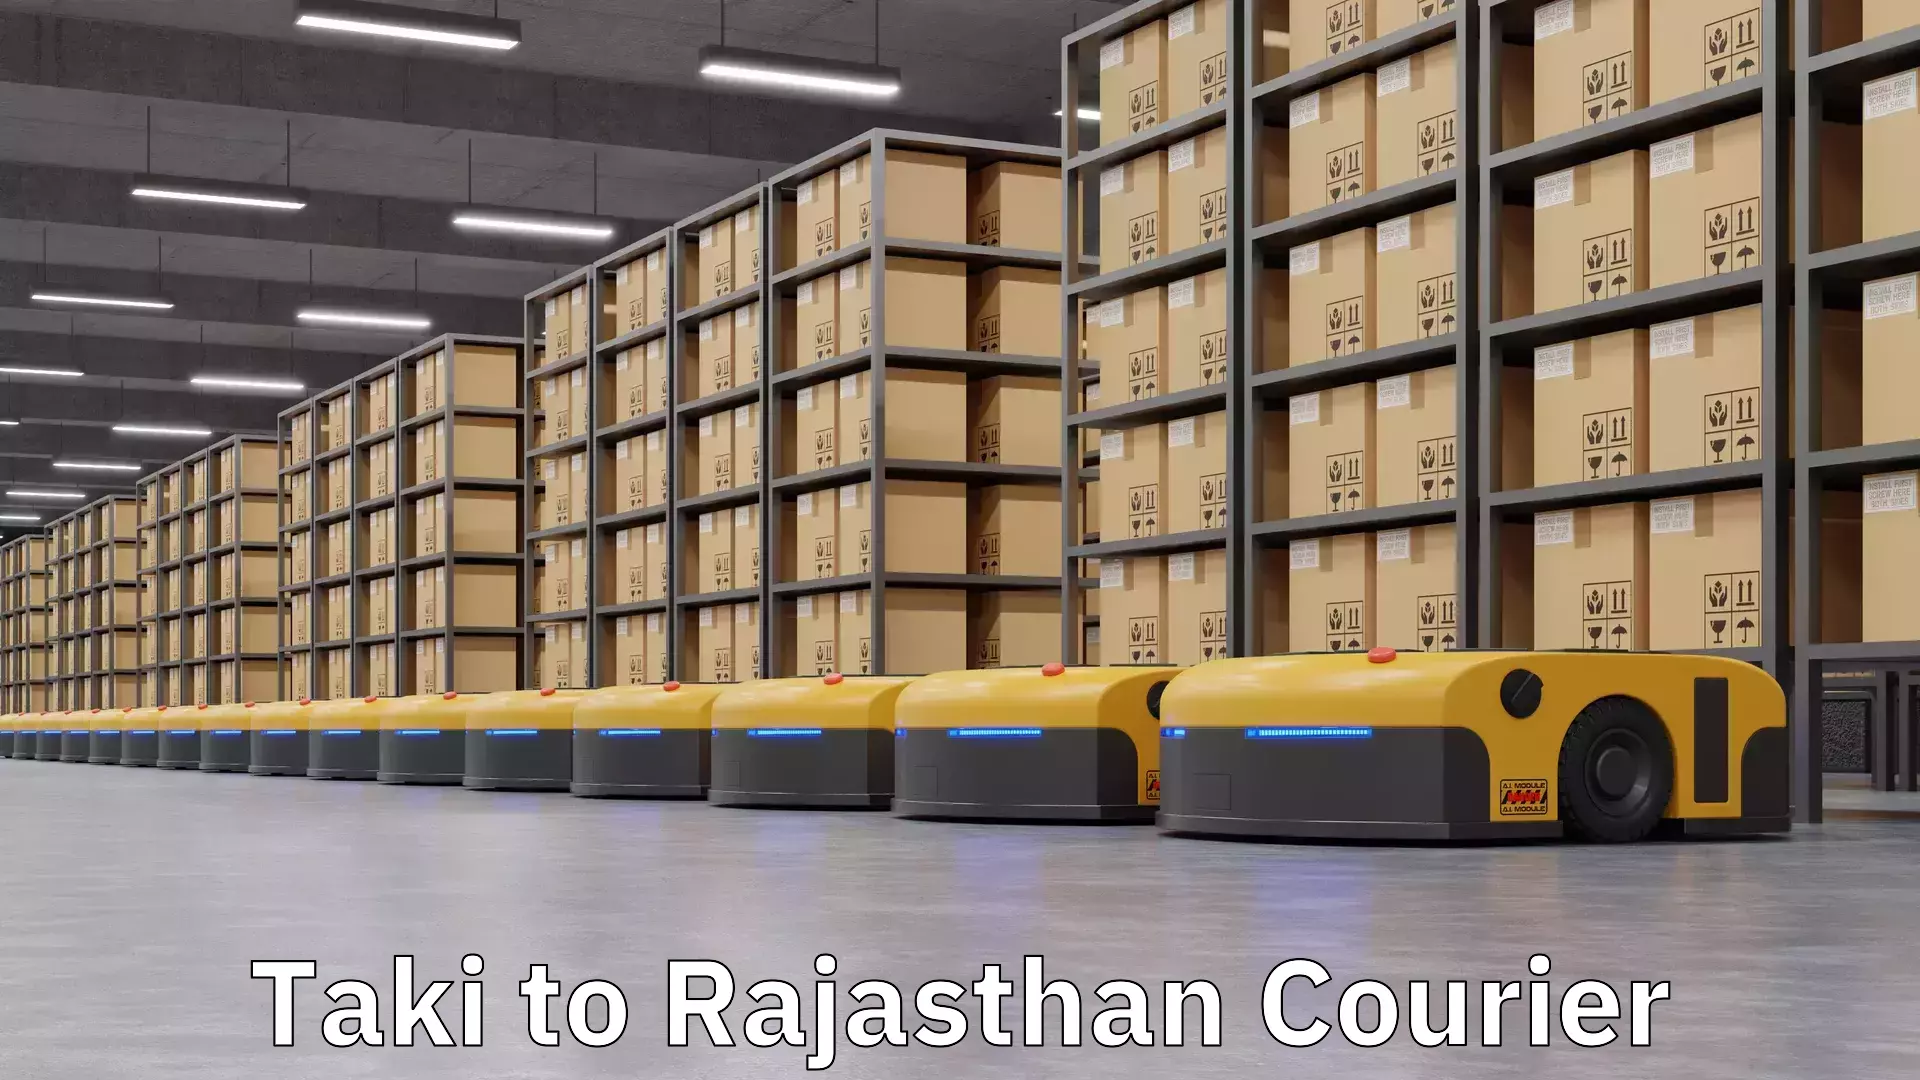 Affordable parcel service Taki to Rajasthan